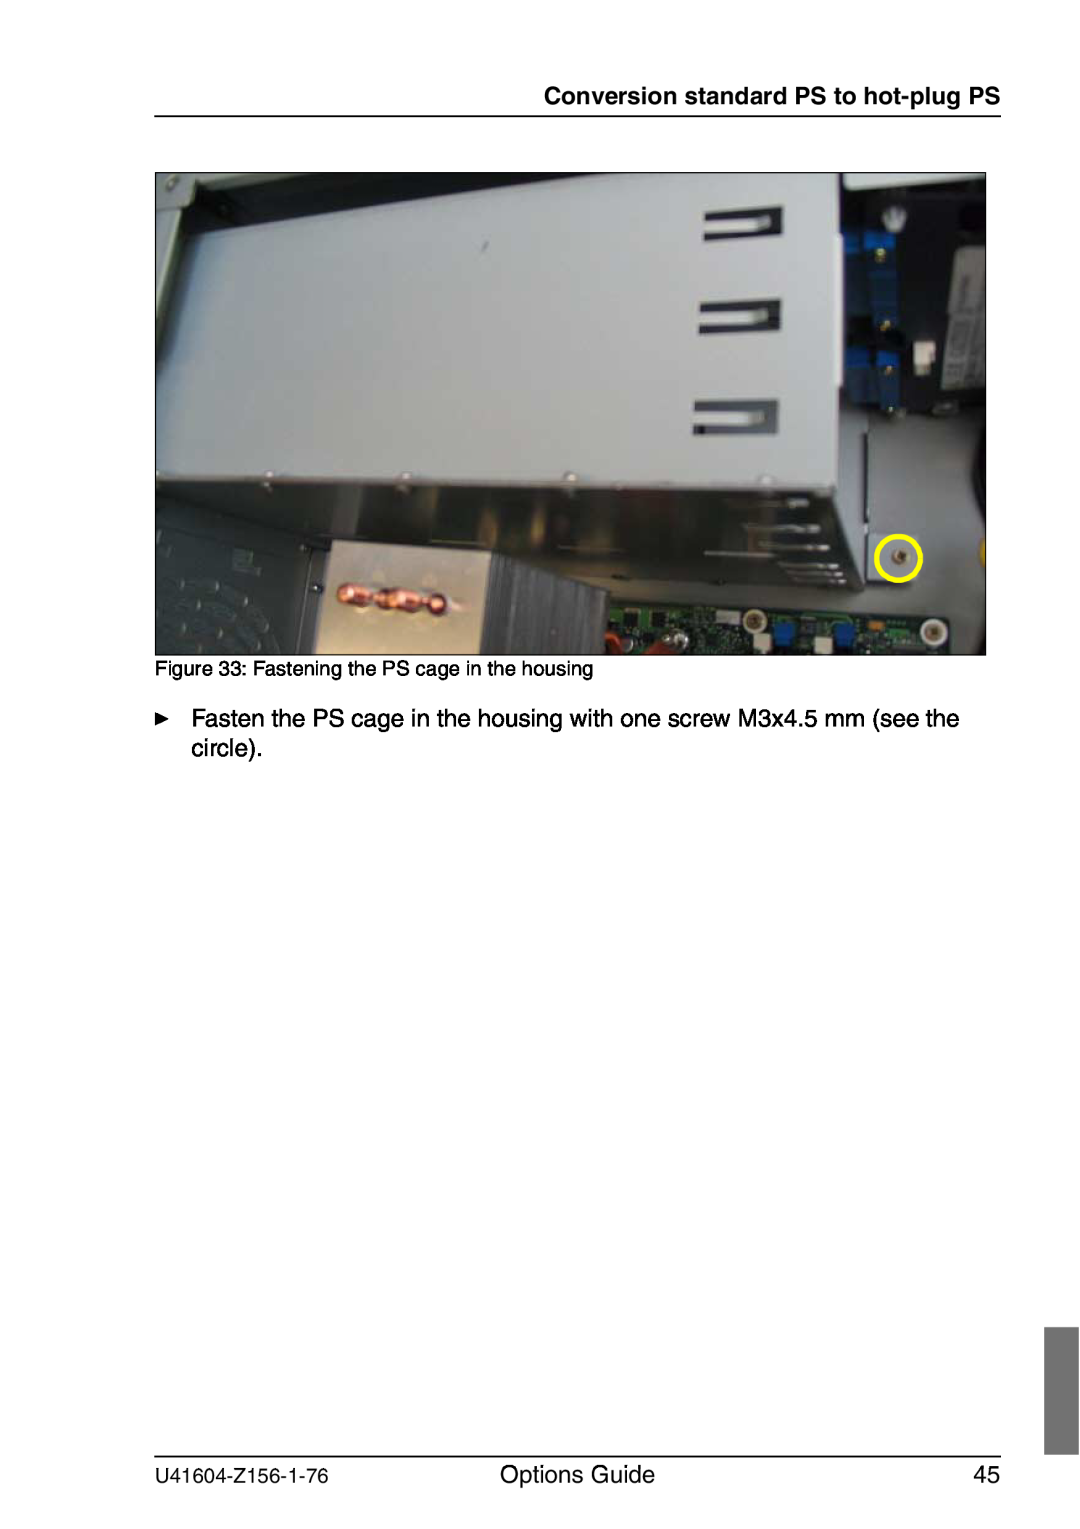 Fujitsu TX150 S3 manual Conversion standard PS to hot-plug PS, Options Guide, Fastening the PS cage in the housing 